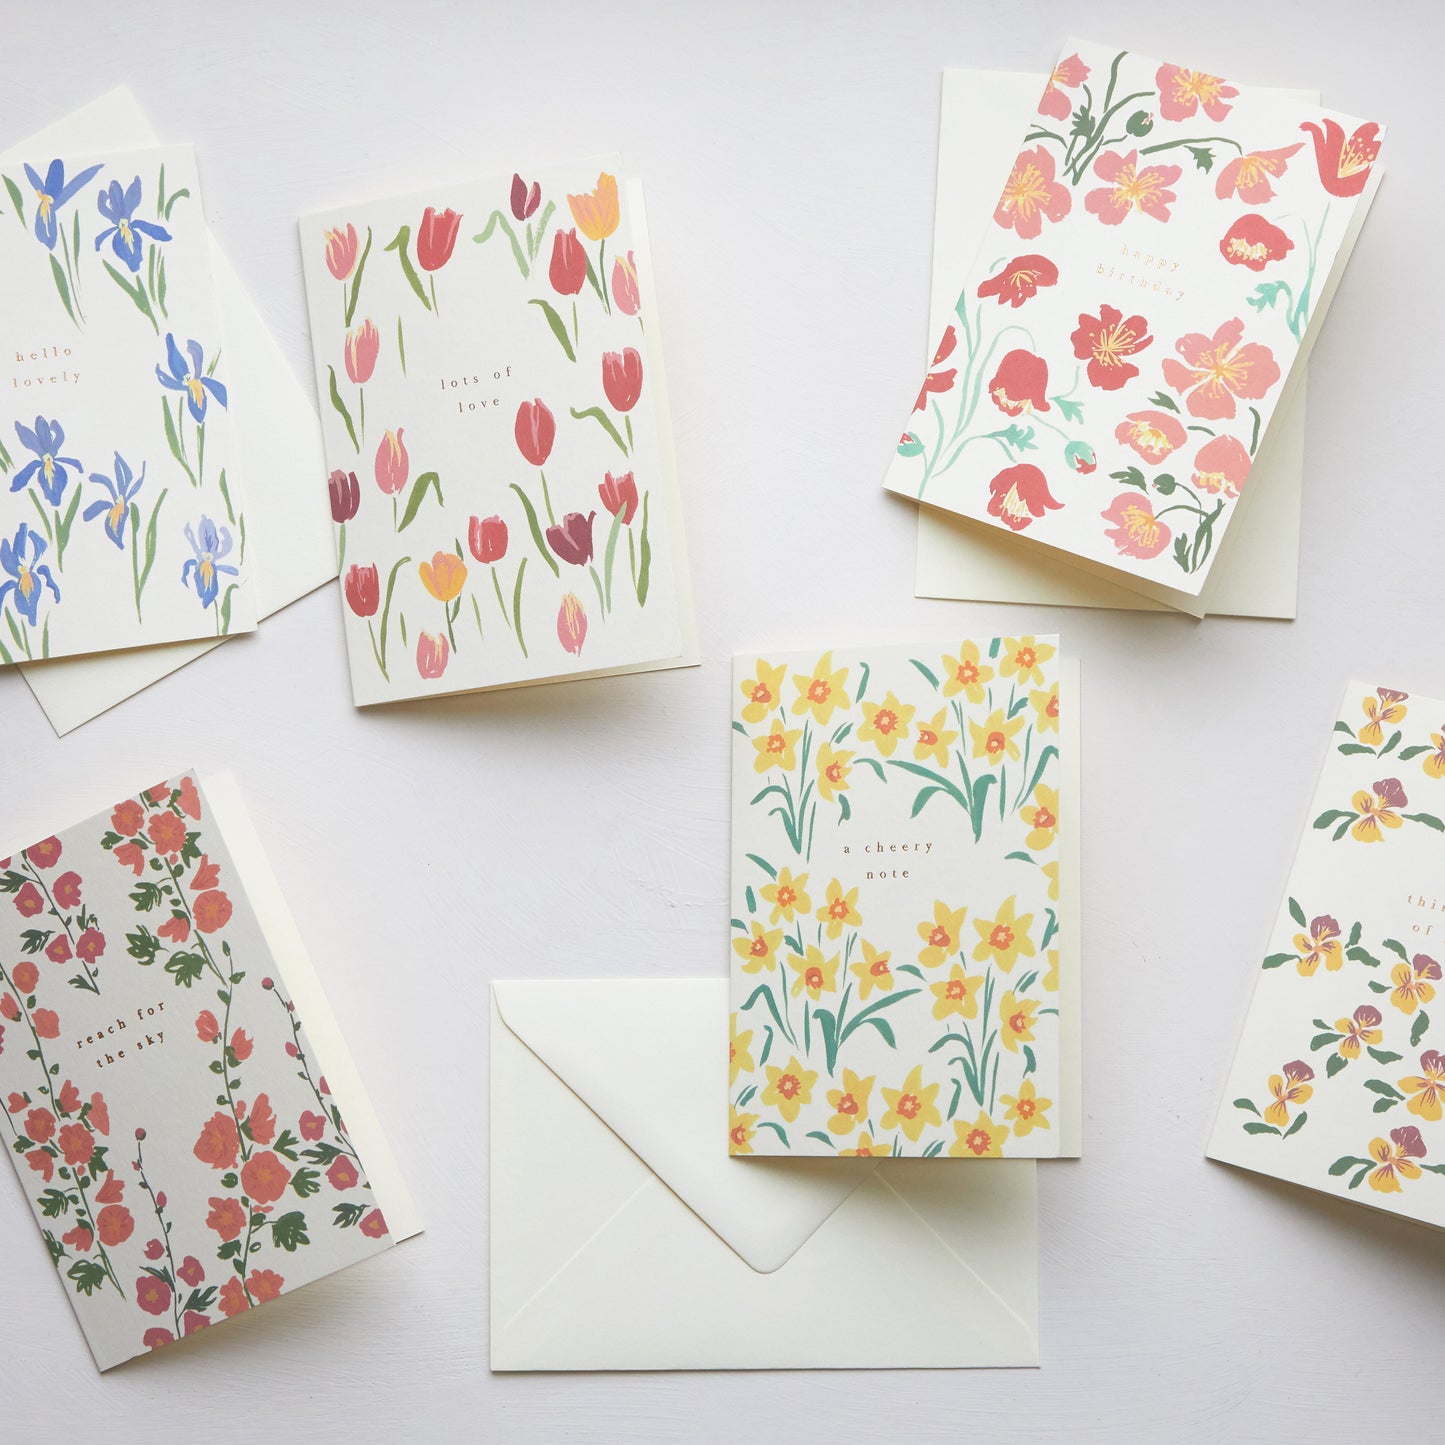 Sophie Harpley, 'The Language of Flowers, set of 10 cards'